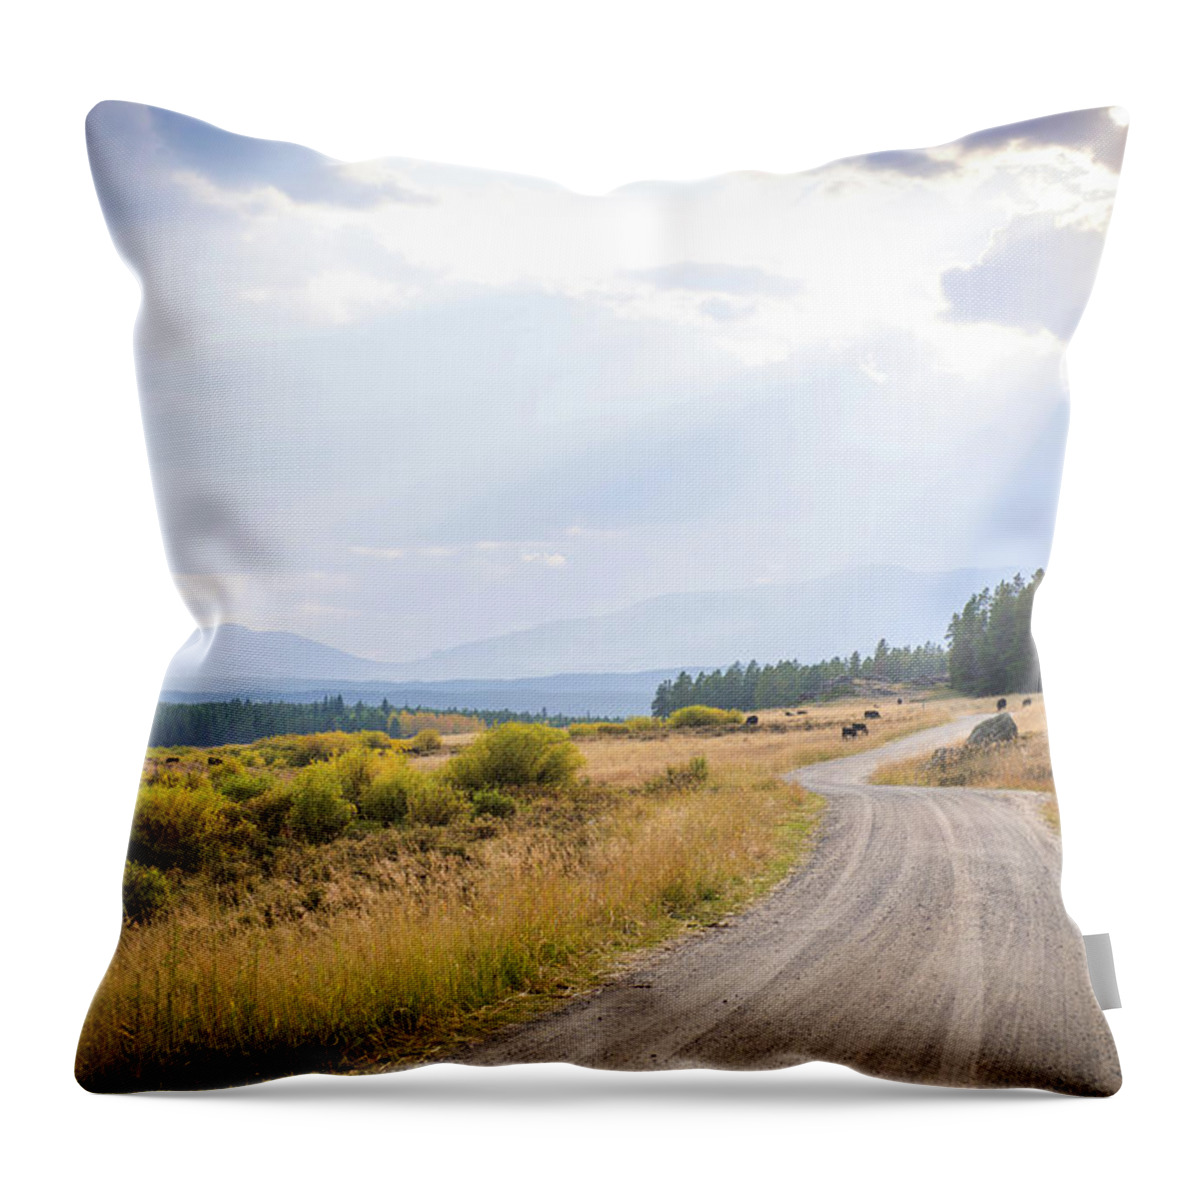 Landscape Throw Pillow featuring the photograph South Dakota Black Hills by Aileen Savage